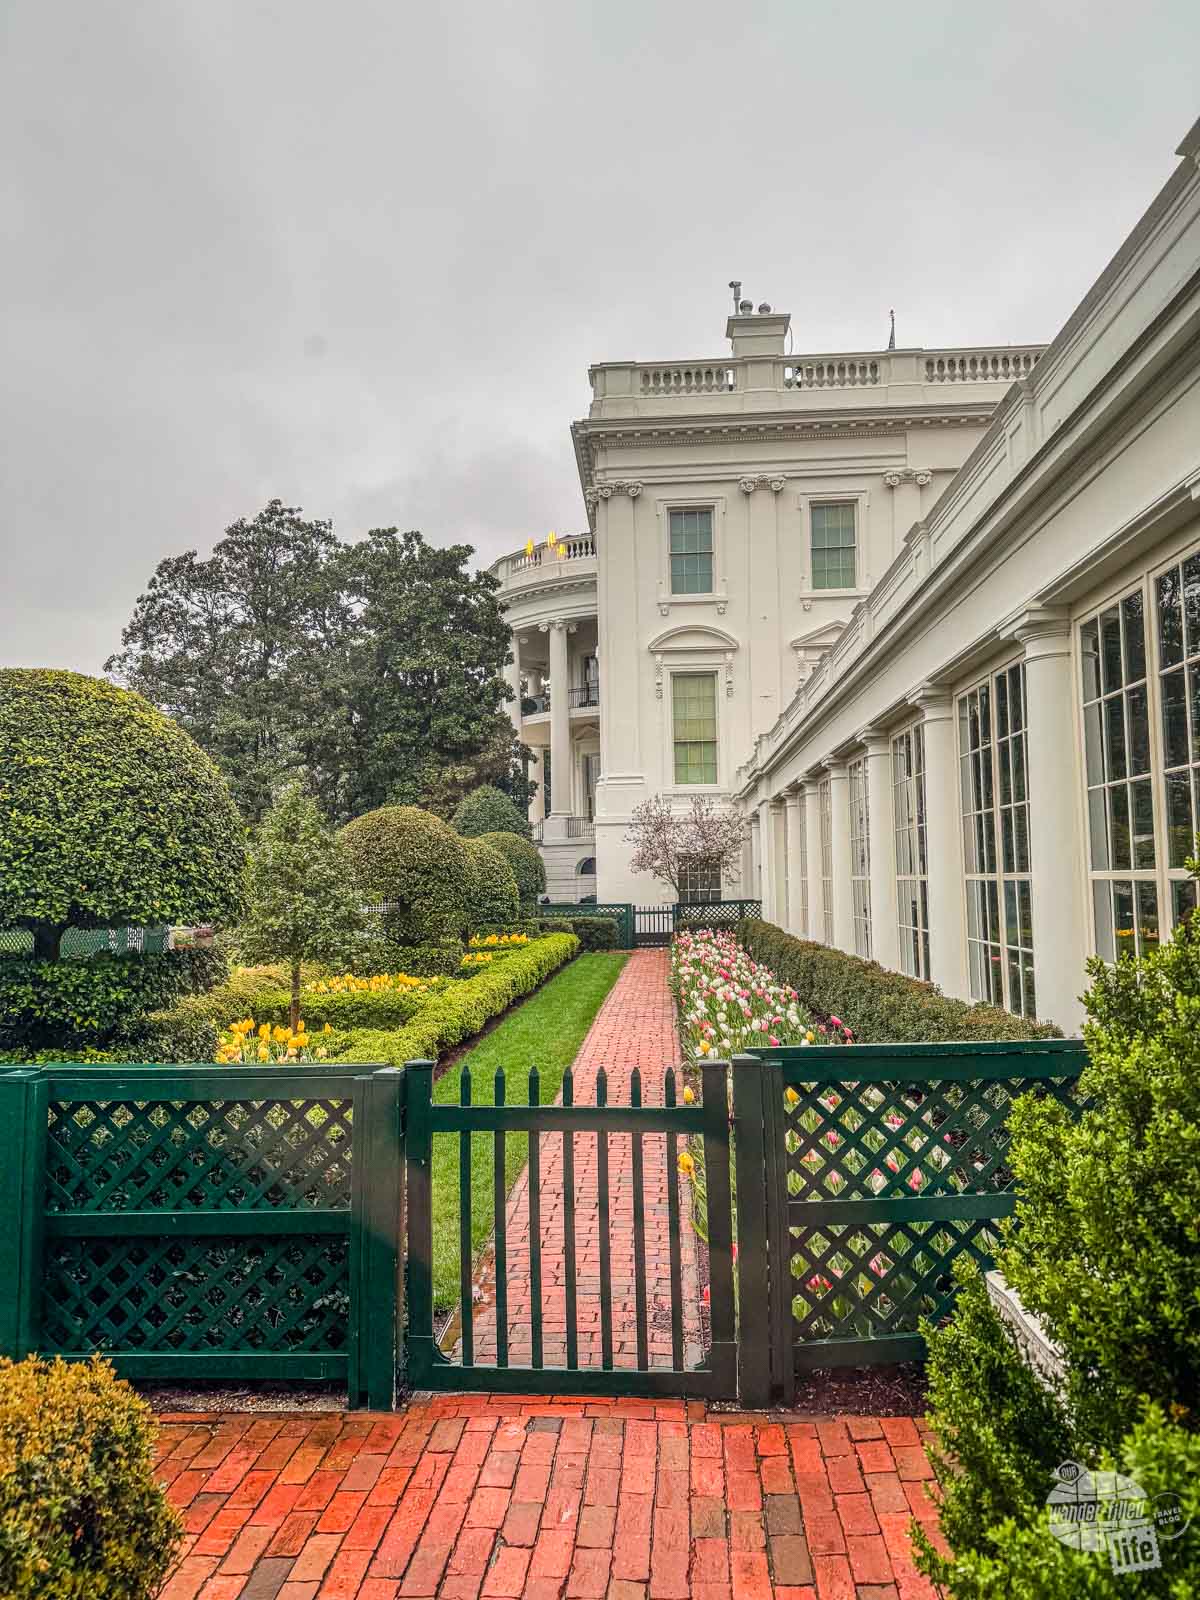 An exterior shot of the White House looking down the outside of the East Colonnade. There is a low wooden fence gating off a brick-paved walkway leading to the main building of the White House.